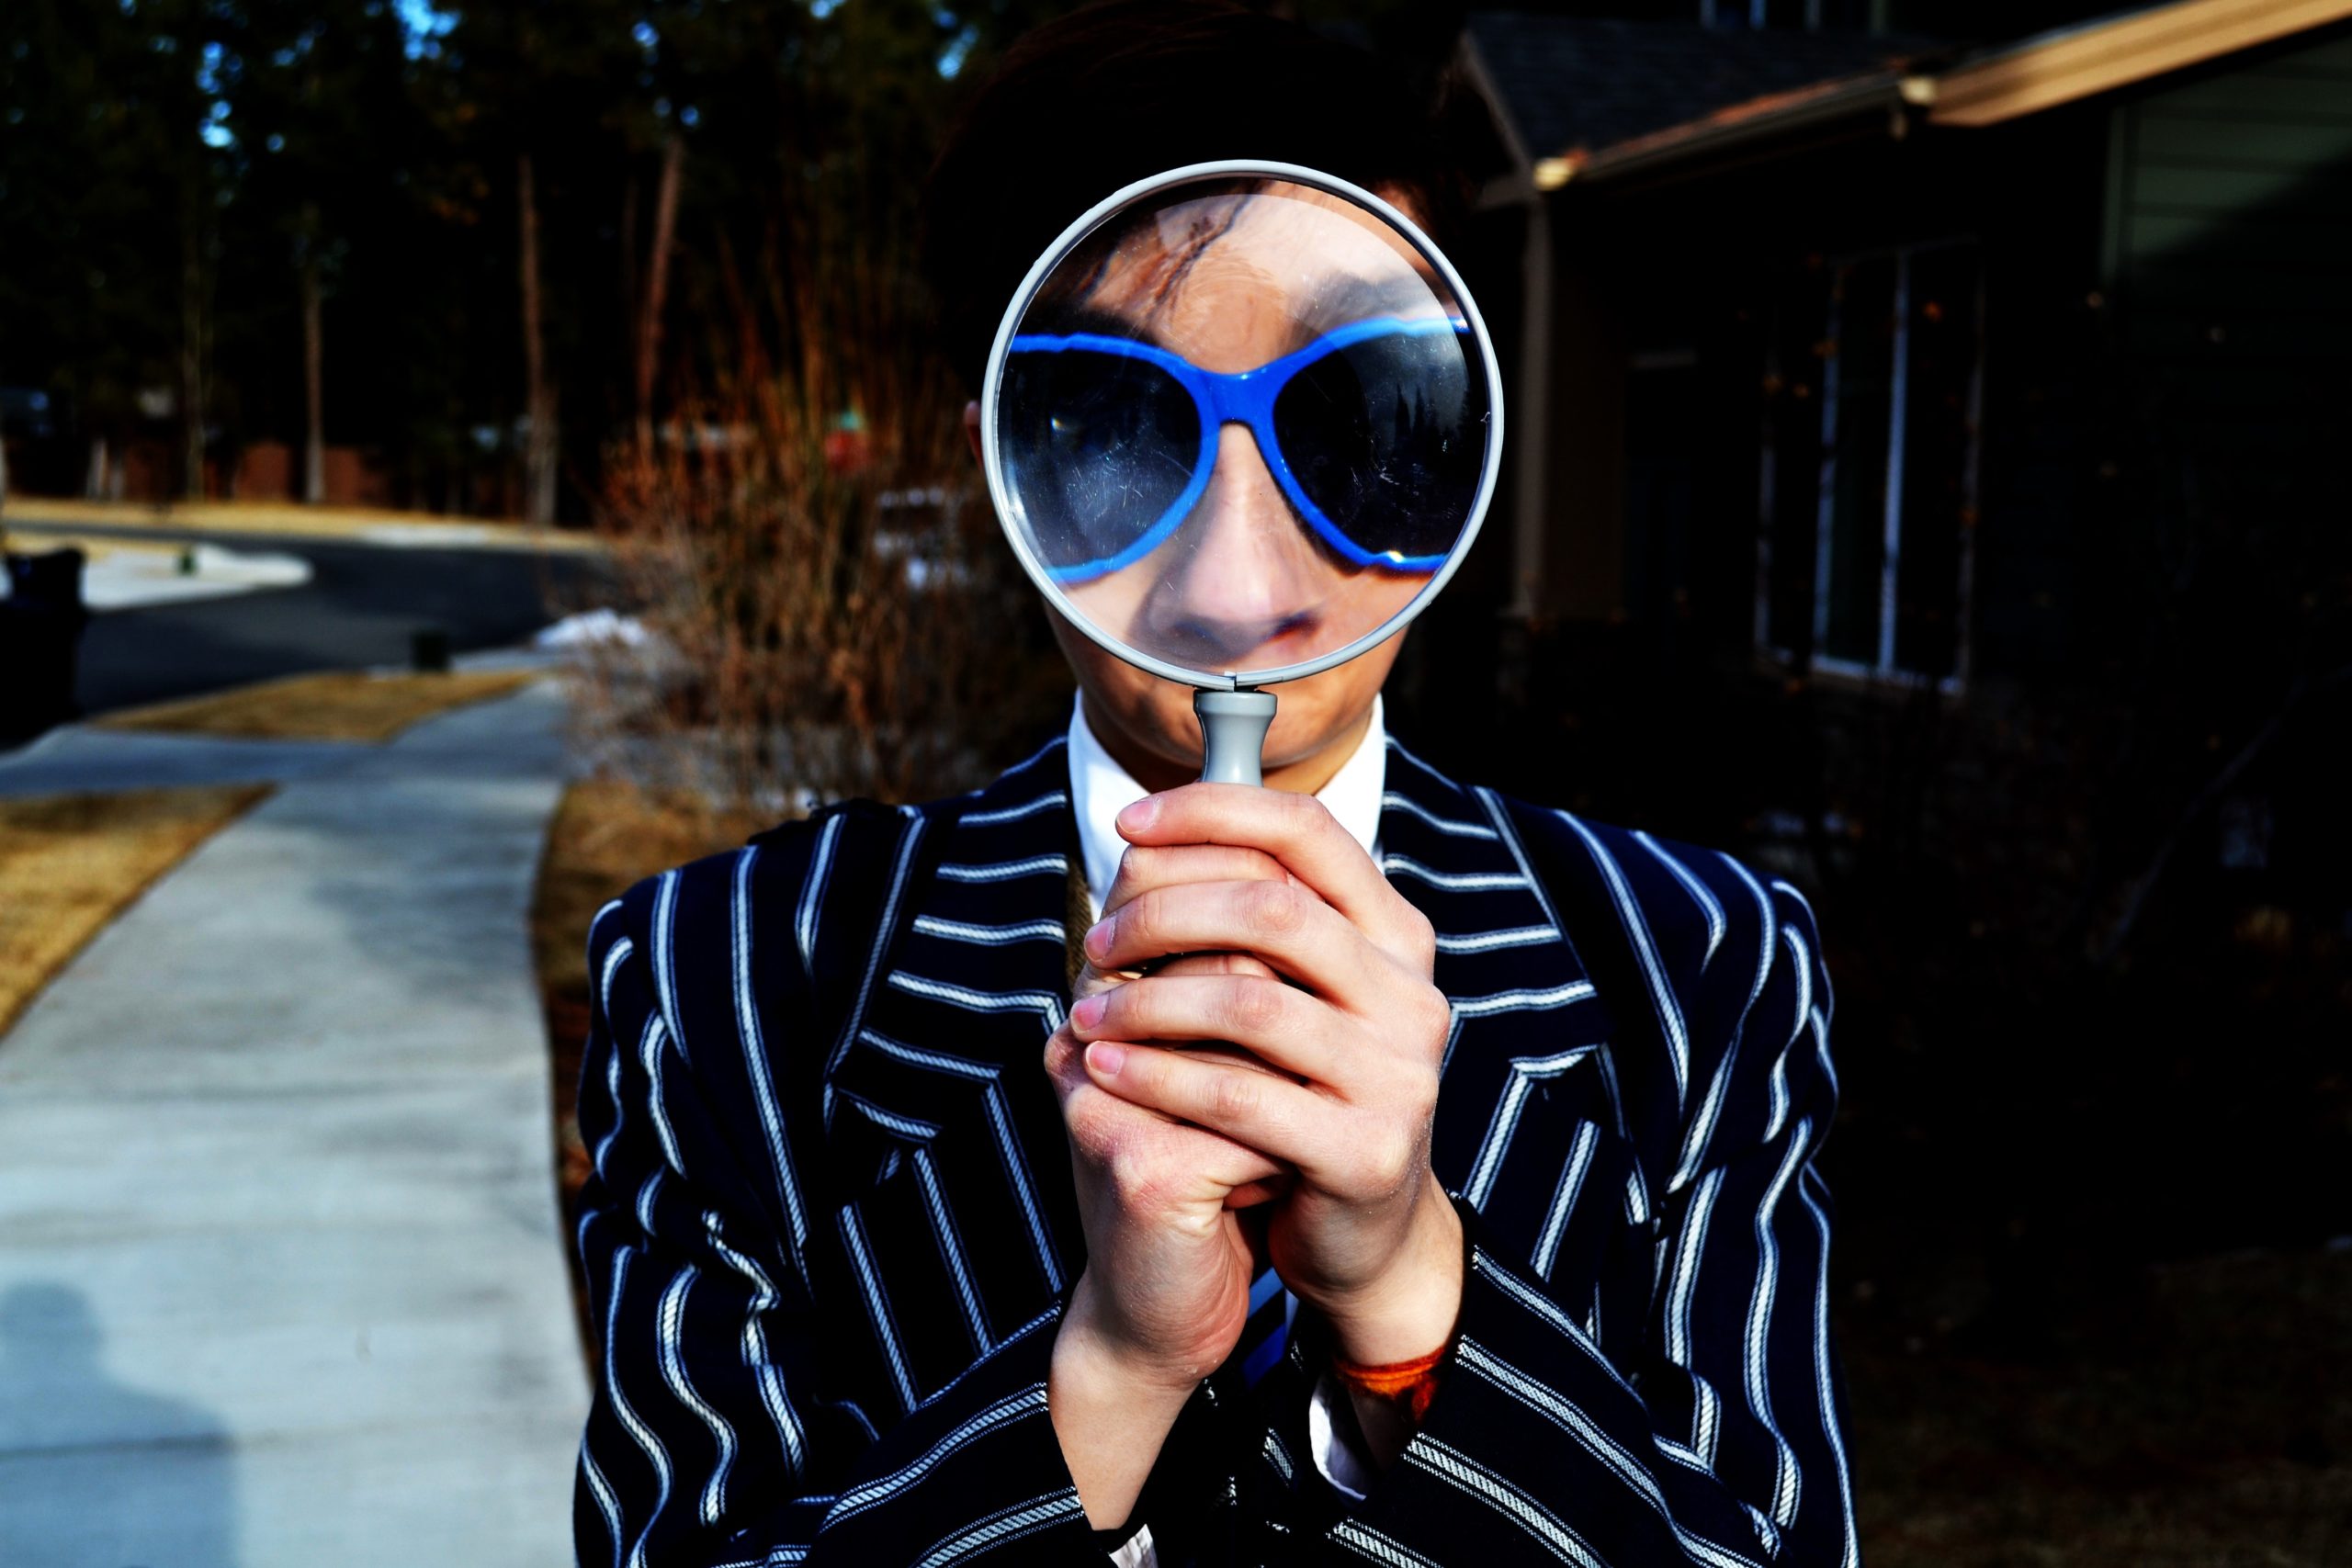 Magnifying glass Photo credit: Marten Newhall of Unsplash